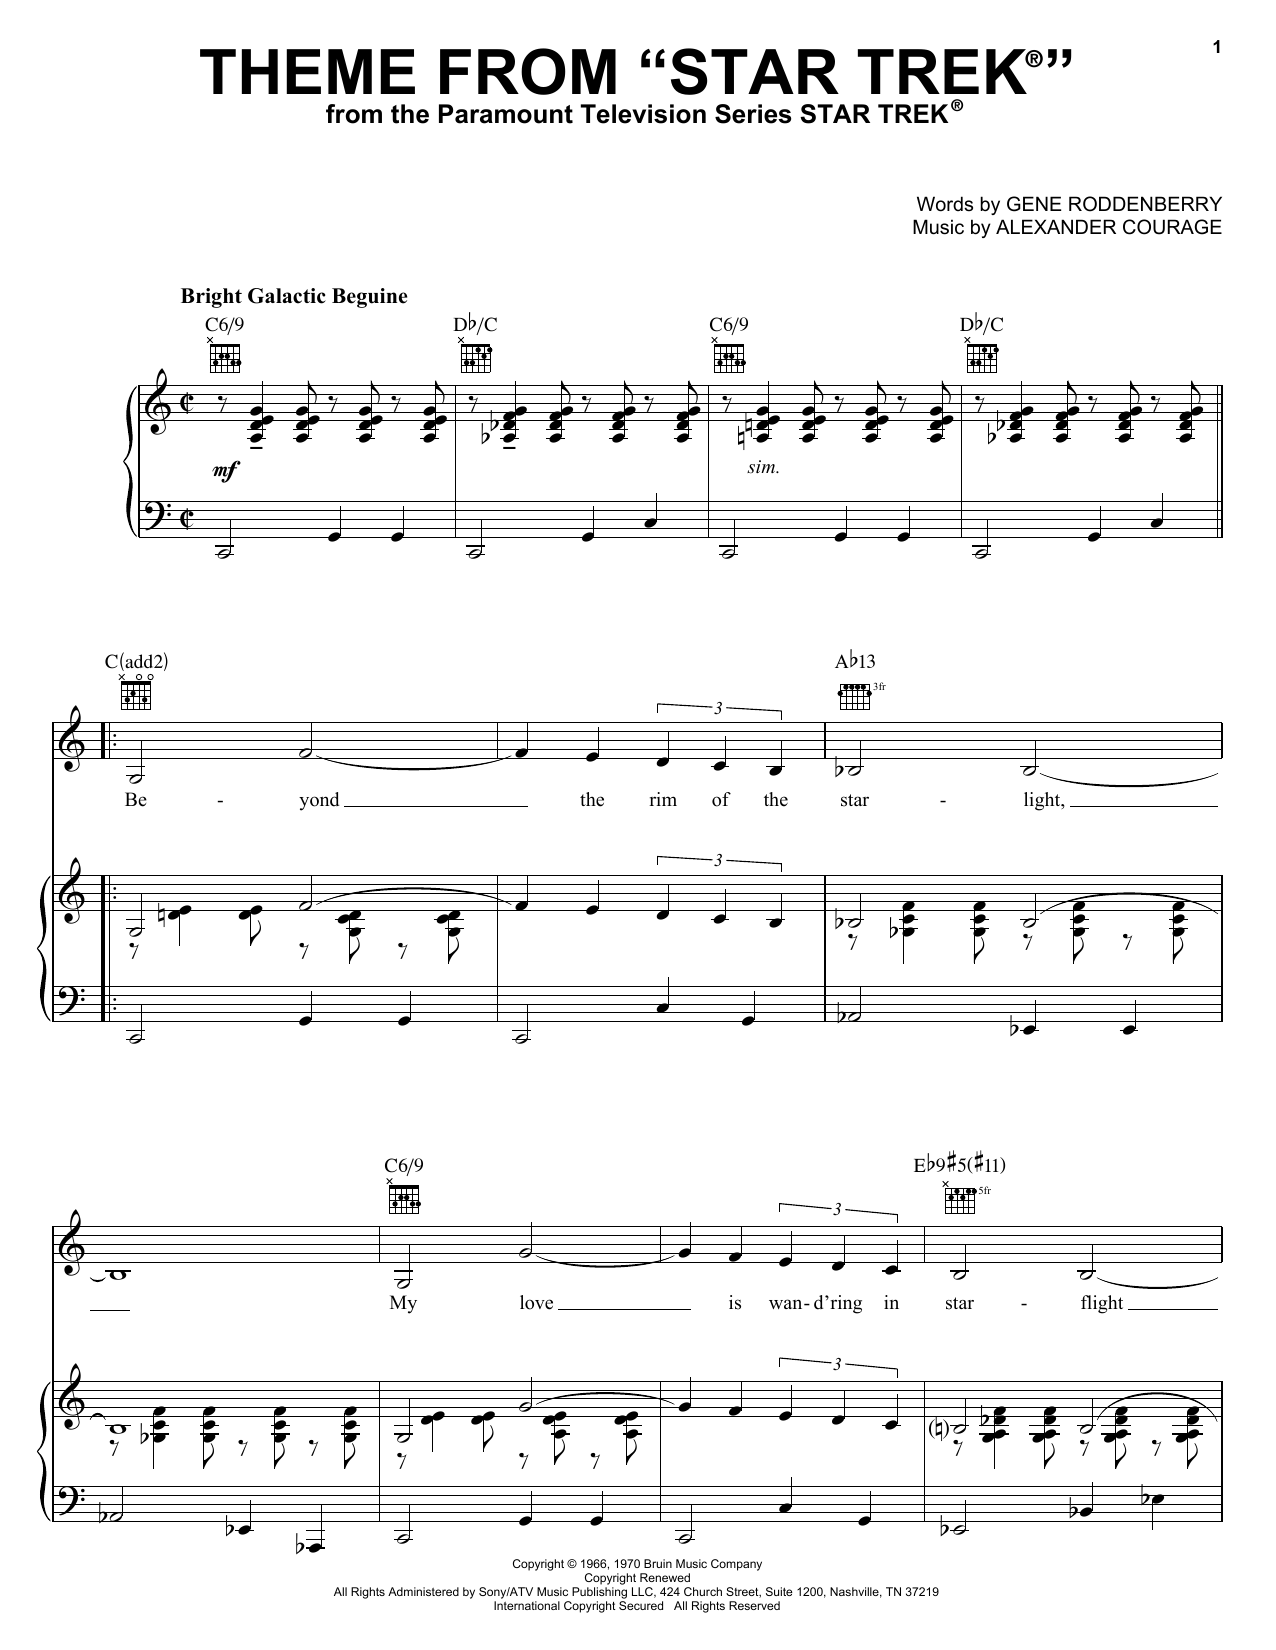 Download Alexander Courage Theme from Star Trek(R) sheet music notes and chords for Piano, Vocal & Guitar (Right-Hand Melody) - Download Printable PDF and start playing in minutes.